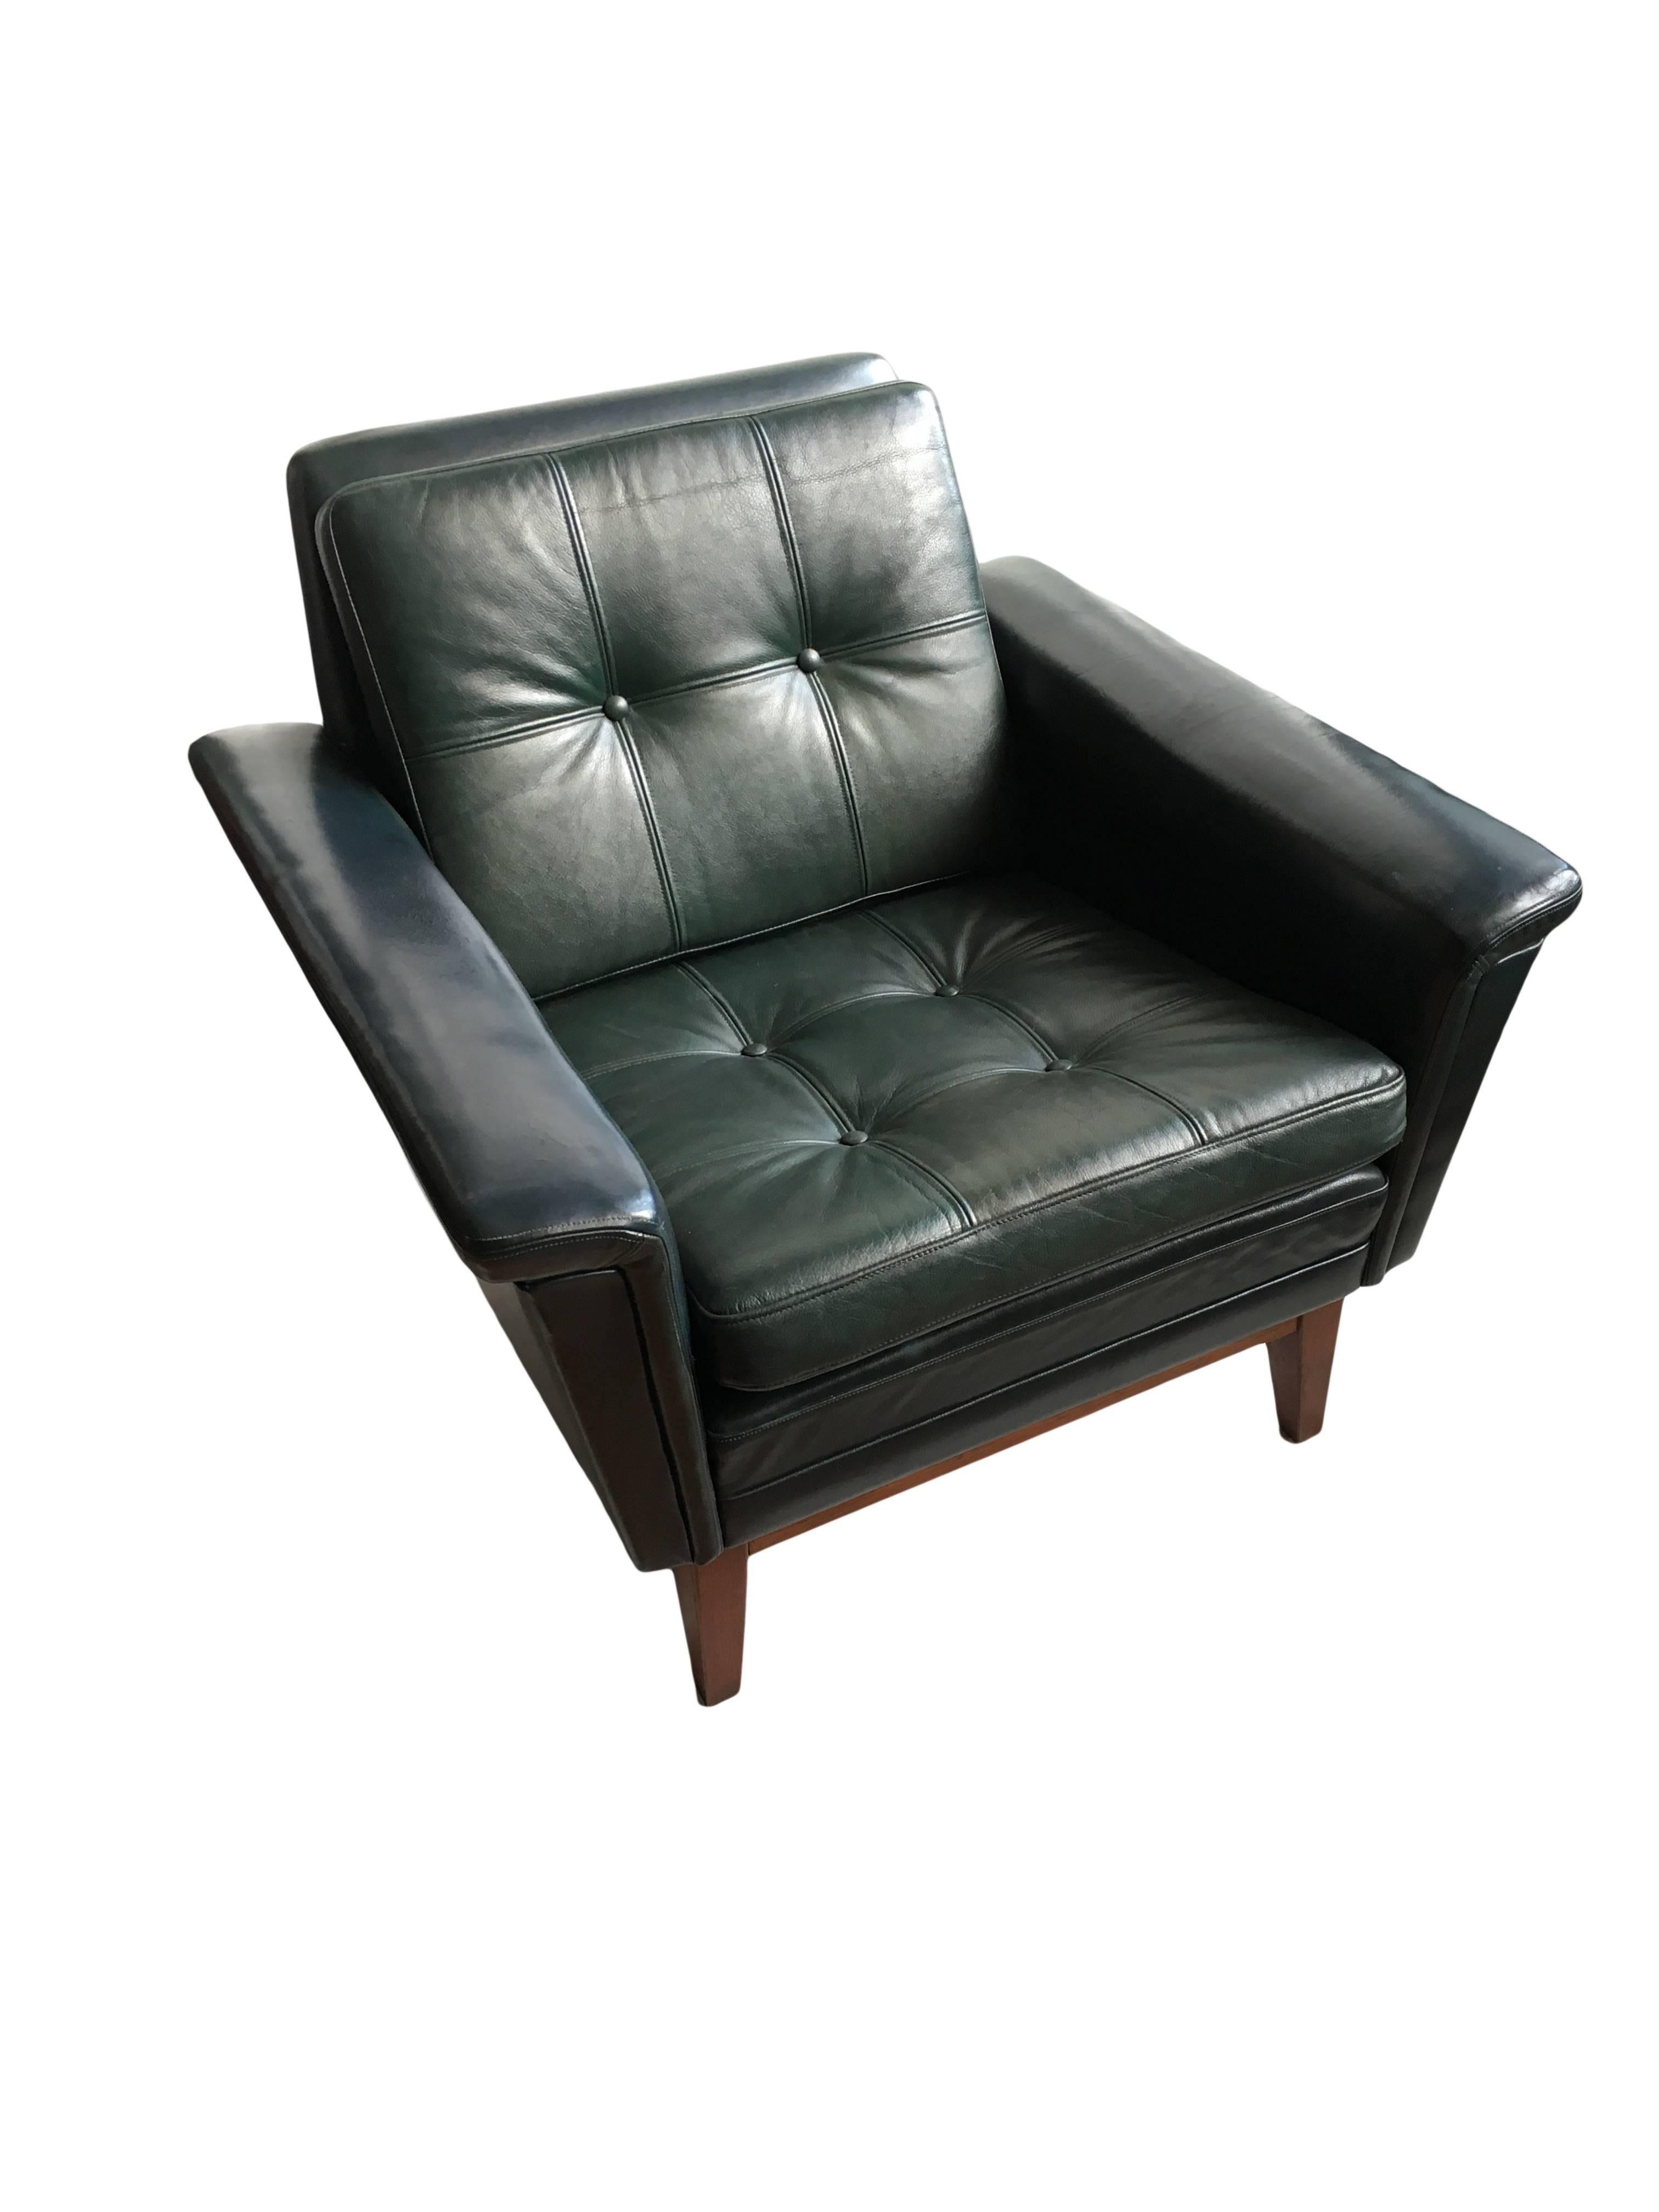 Really fantastic shape to this Danish lounge club chair. Lovely deep and dark green-blue aged leather. Produced in the late 1950’s. The base and legs are in pau ferro rosewood. 
The chair has been completely cleaned, conditioned and